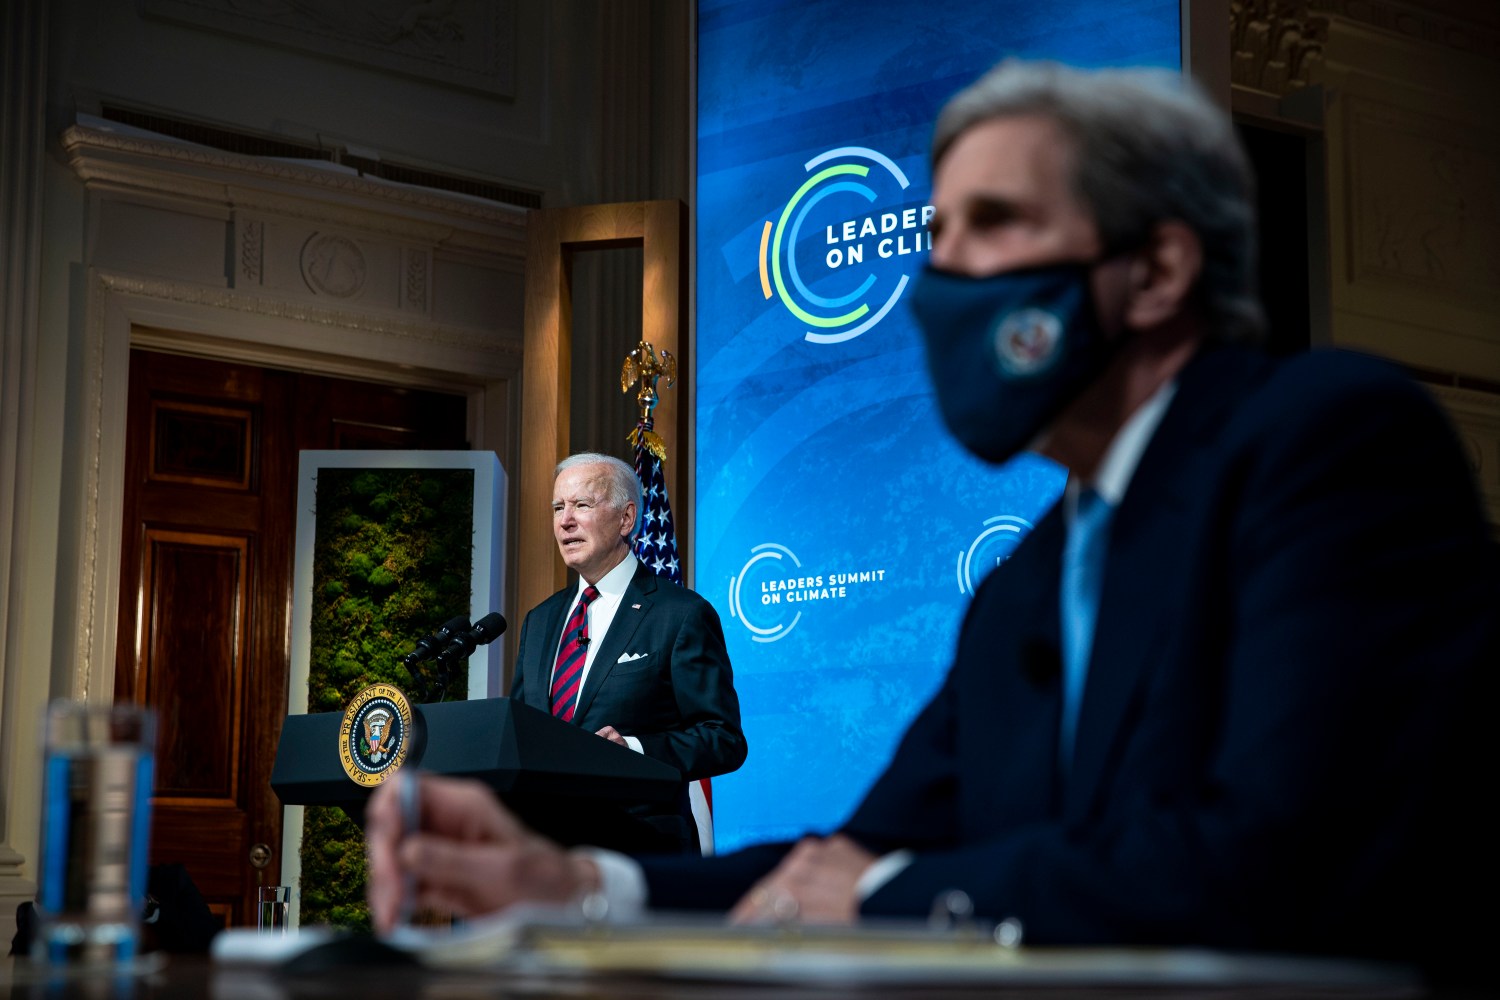 President Joe Biden speaks as Special Presidential Envoy for Climate John Kerry listens during a virtual Leaders Summit on Climate, in the East Room of the White House, on Thursday, April 22, 2021 in Washington. (Al Drago for Pool/Sipa USA) No Use Germany.